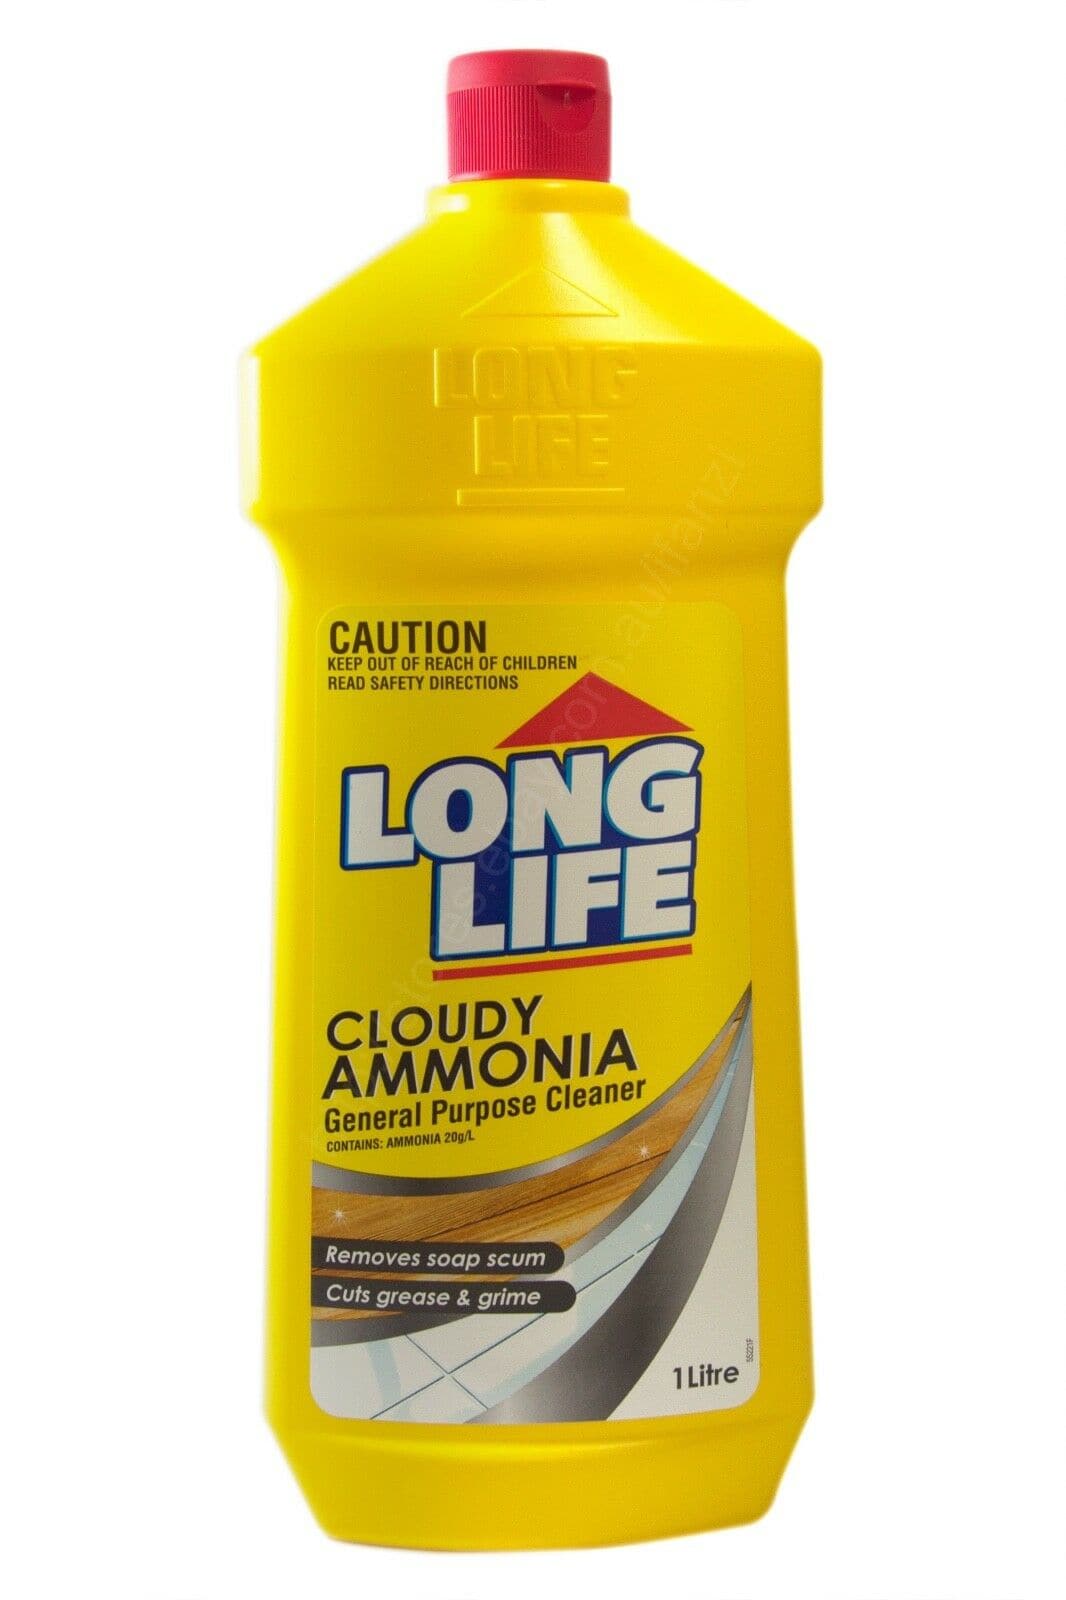 LongLife Cloudy Ammonia 1L General Purpose Cleaner 55221F - Double Bay Hardware